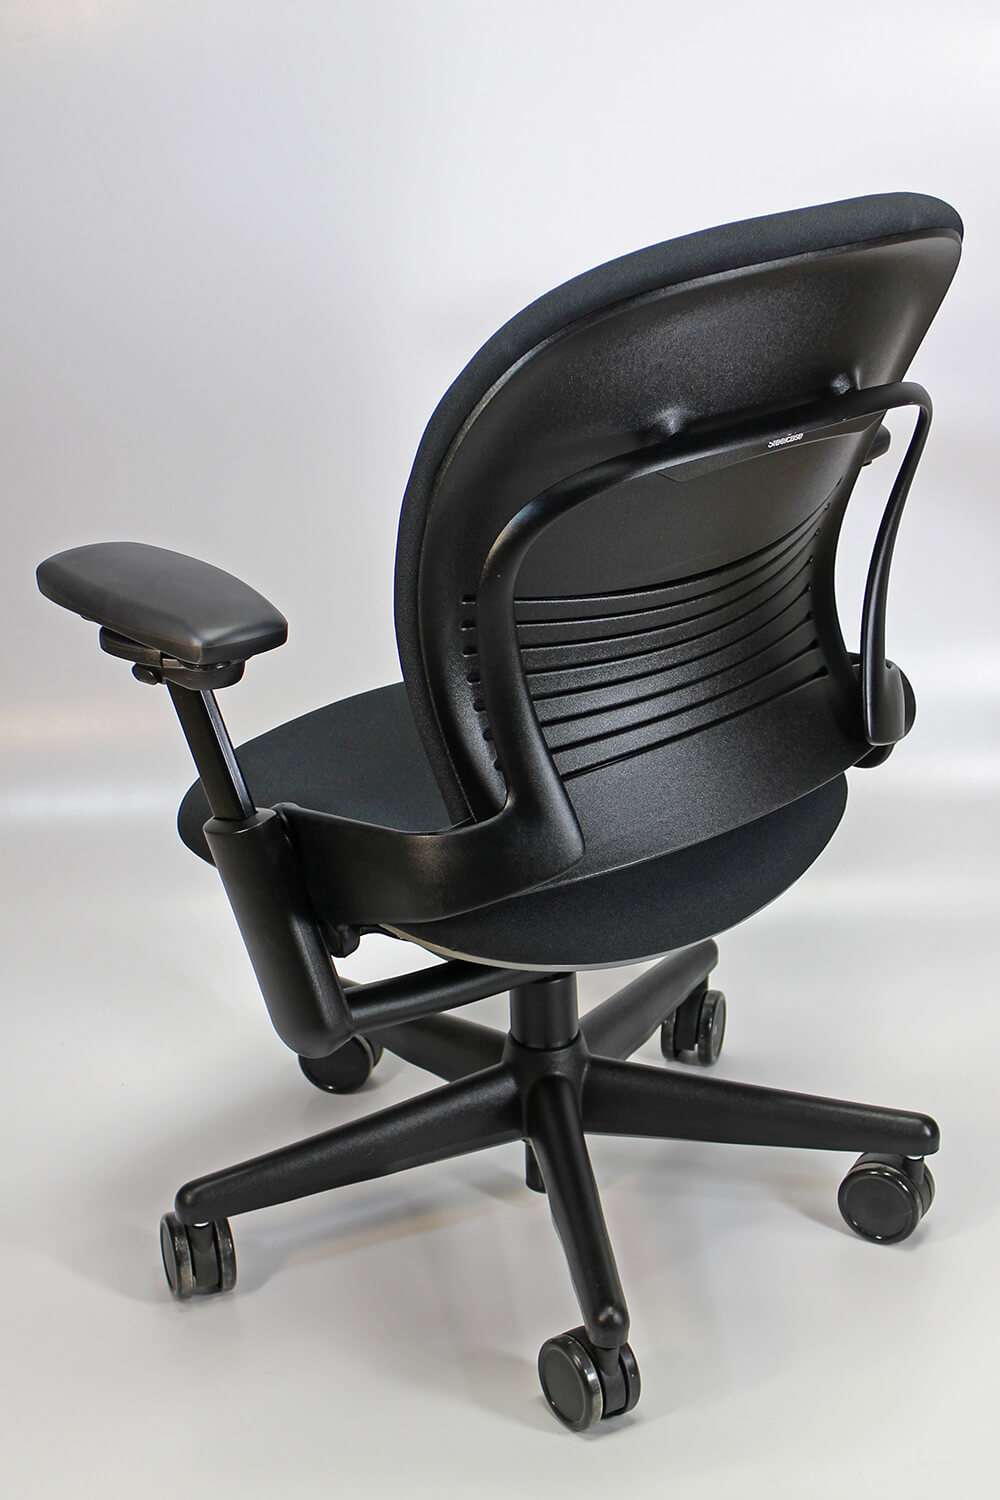 Steelcase Office Chairs - Remanufactured Steelcase Leap Chair Version 1